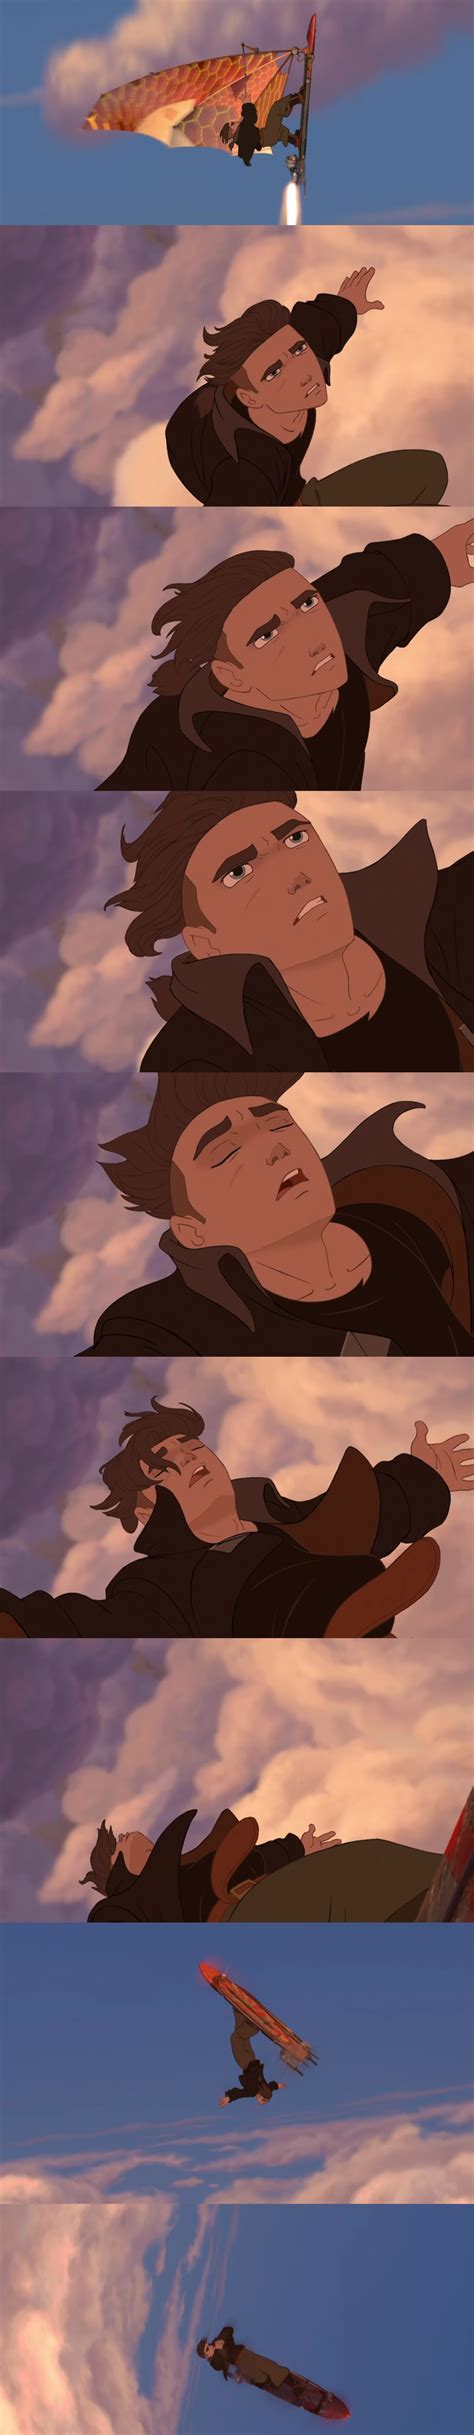 jim hawkins treasure planet there will be peace when we are done walt disney disney love